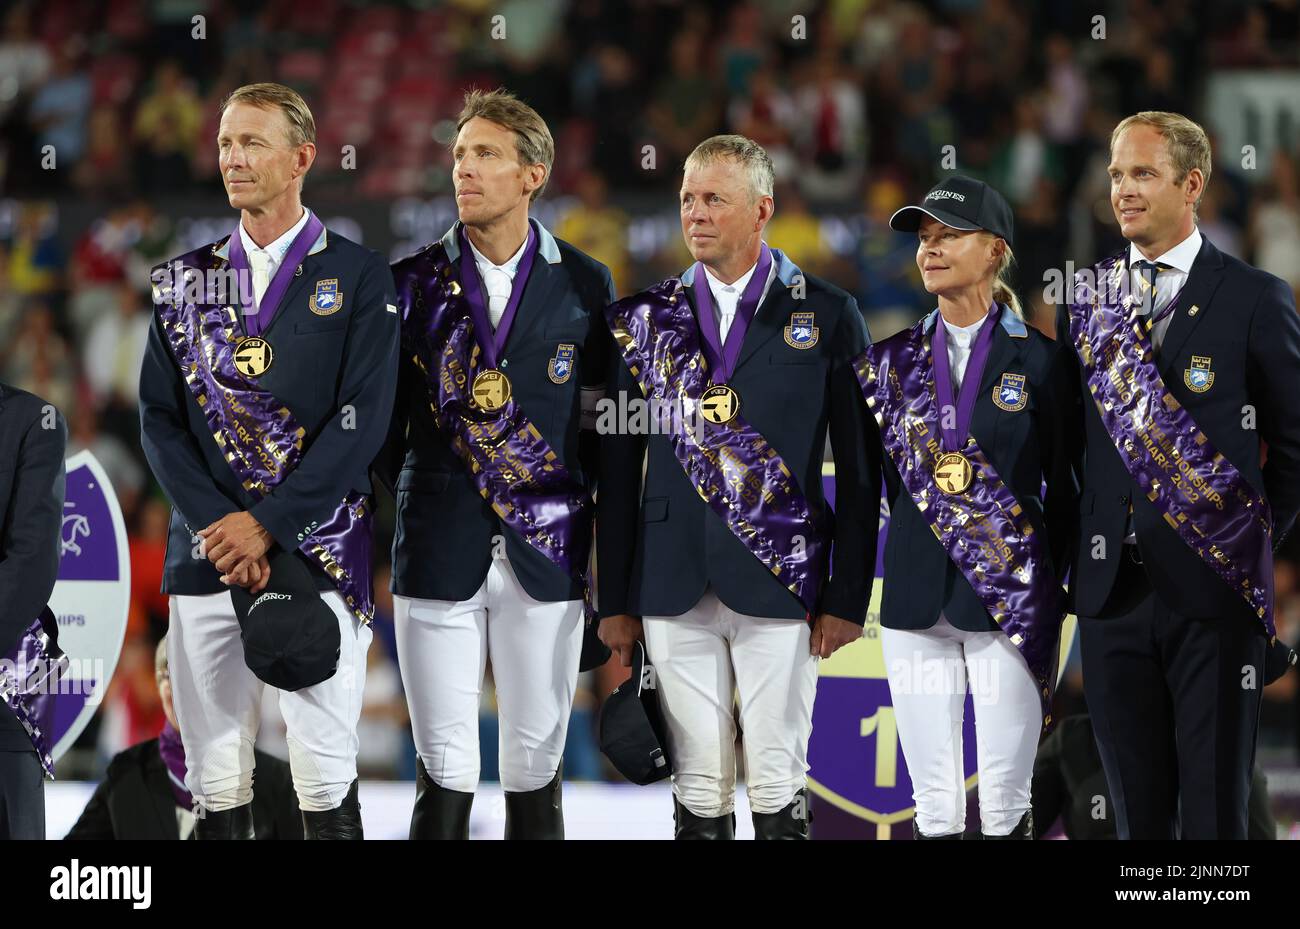 Herning, Denmark. 12th Aug, 2022. Equestrian sport; World Championship, Show Jumping. Show jumpers Peder Fredricson (l-r), Henrik von Eckermann, Jens Fredricson, Malin Baryard-Johnsson and Chef d'Equipe Henrik Ankarcrona (Sweden) stand on the podium with gold medals at the award ceremony. Credit: Friso Gentsch/dpa/Alamy Live News Stock Photo